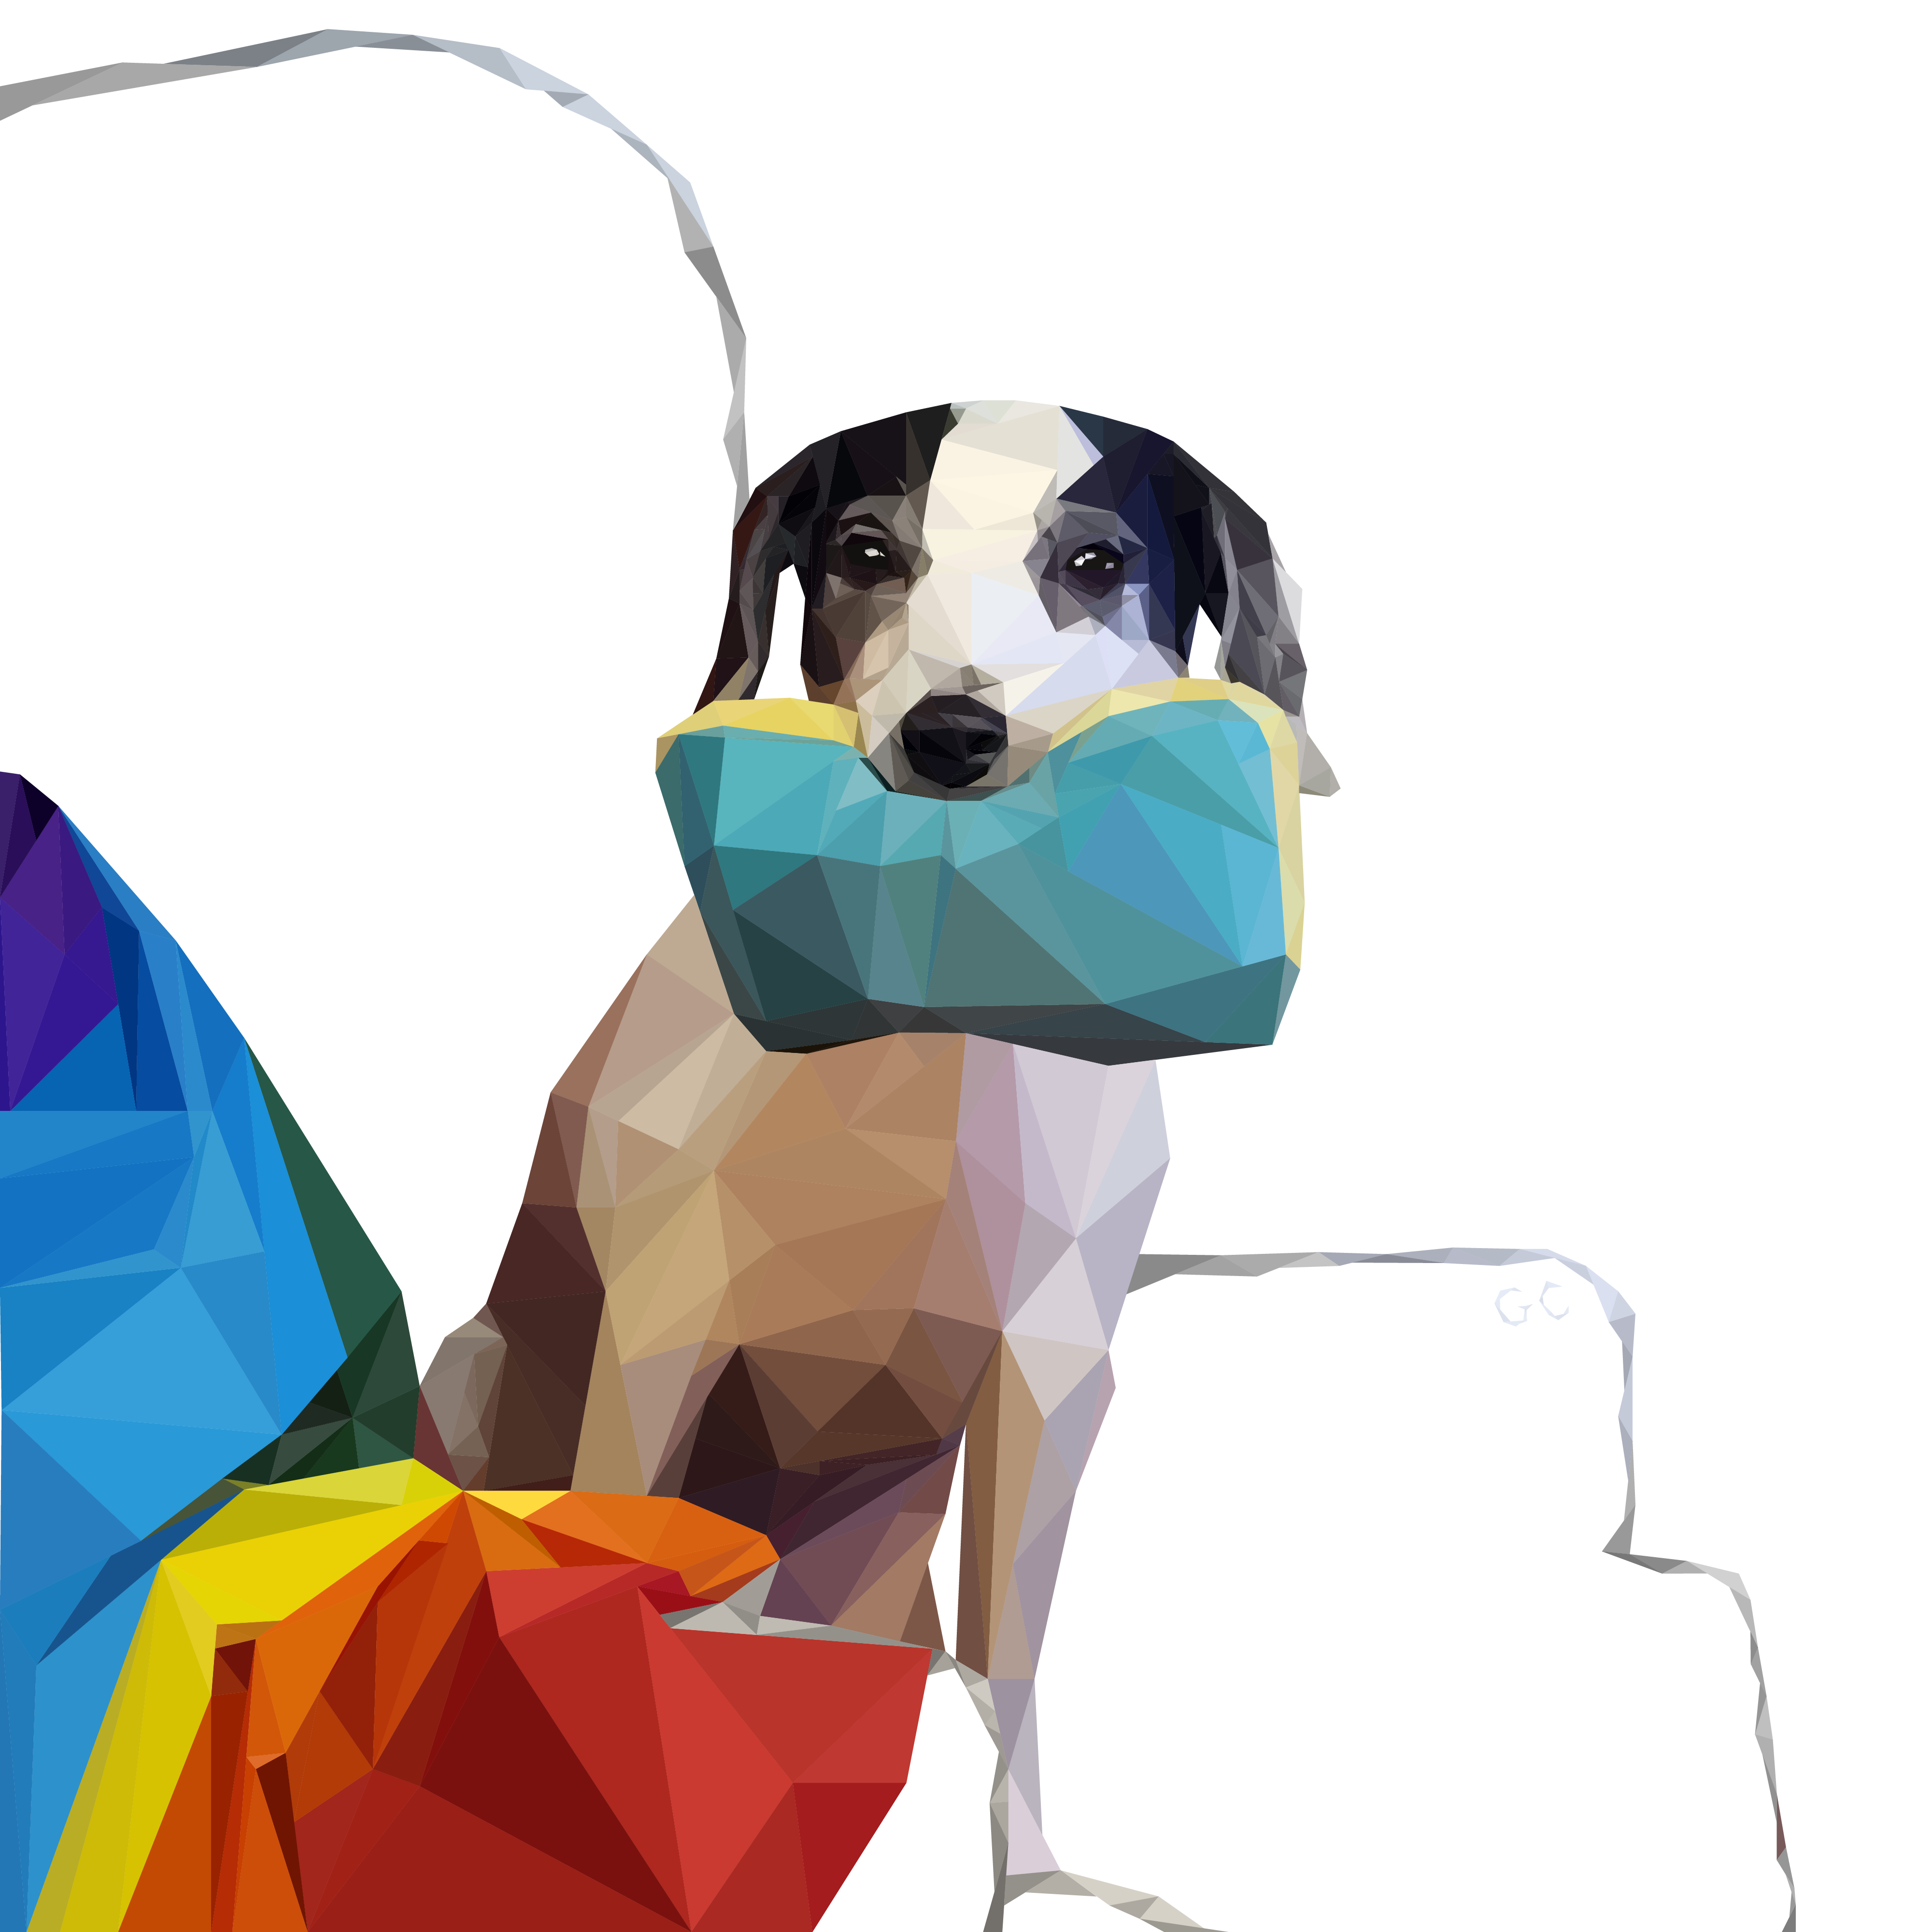 Polygon vector image of Snoopy the dog.